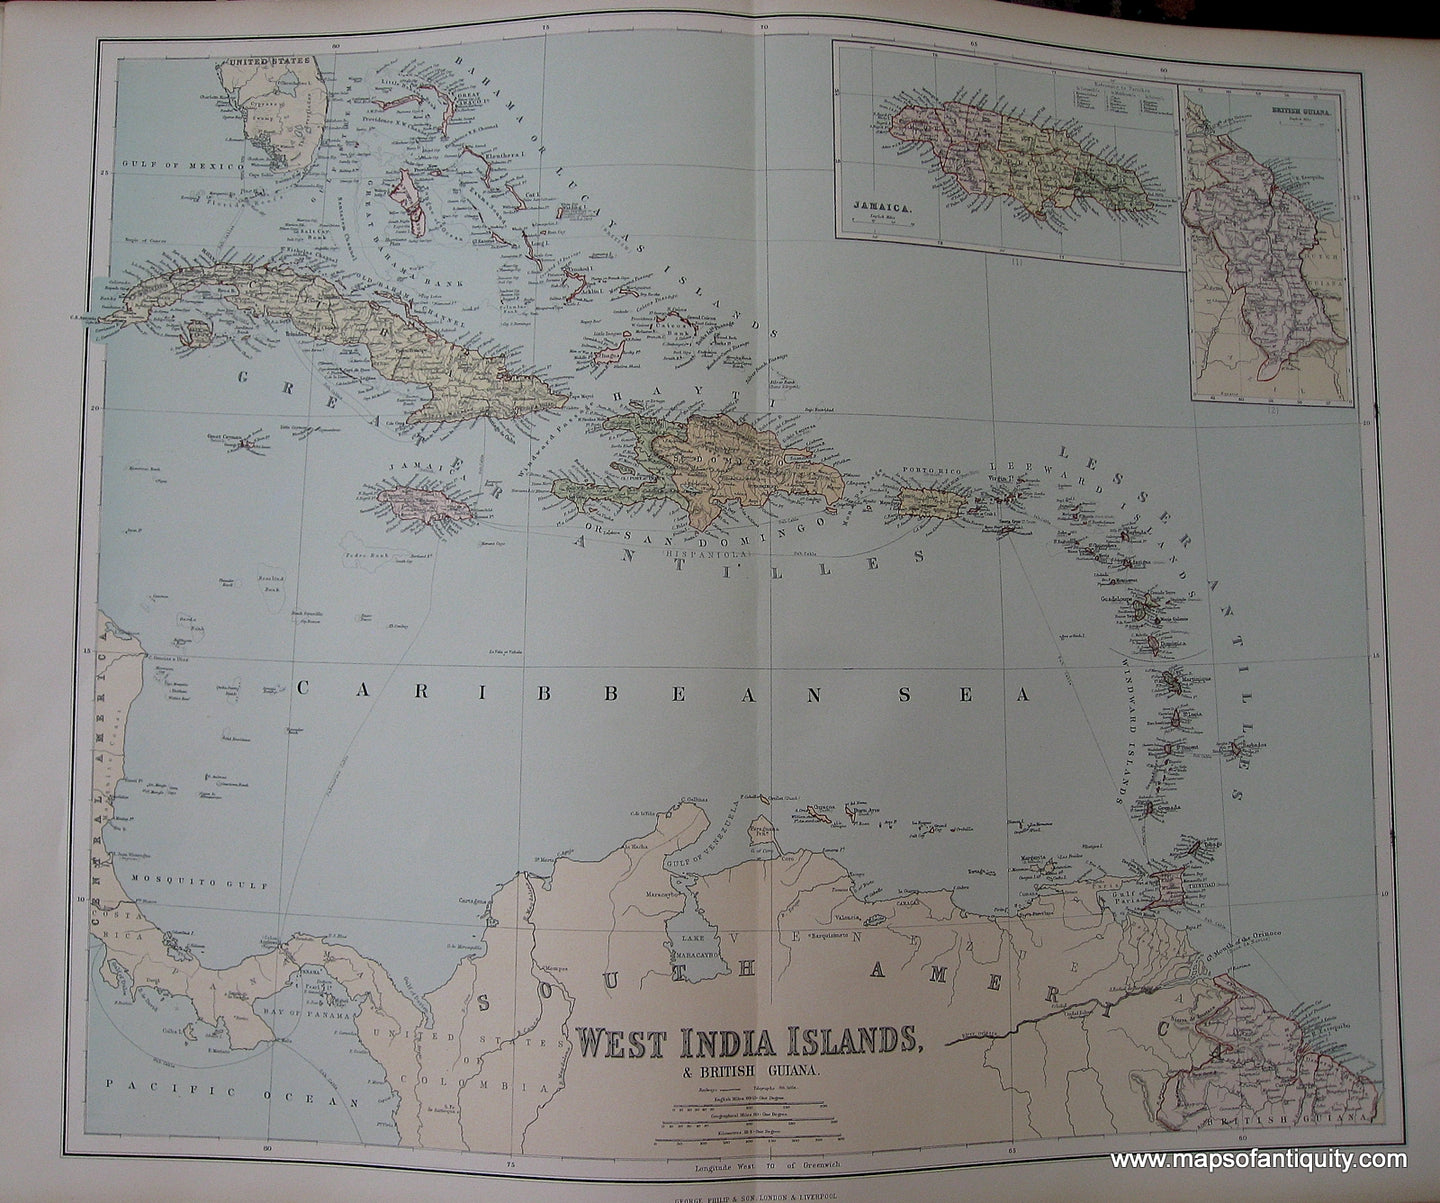 Antique-Map-West-India-Islands-&-British-Guiana-Central-America-and-Caribbean-West-Indies-1890-Philips-Maps-Of-Antiquity